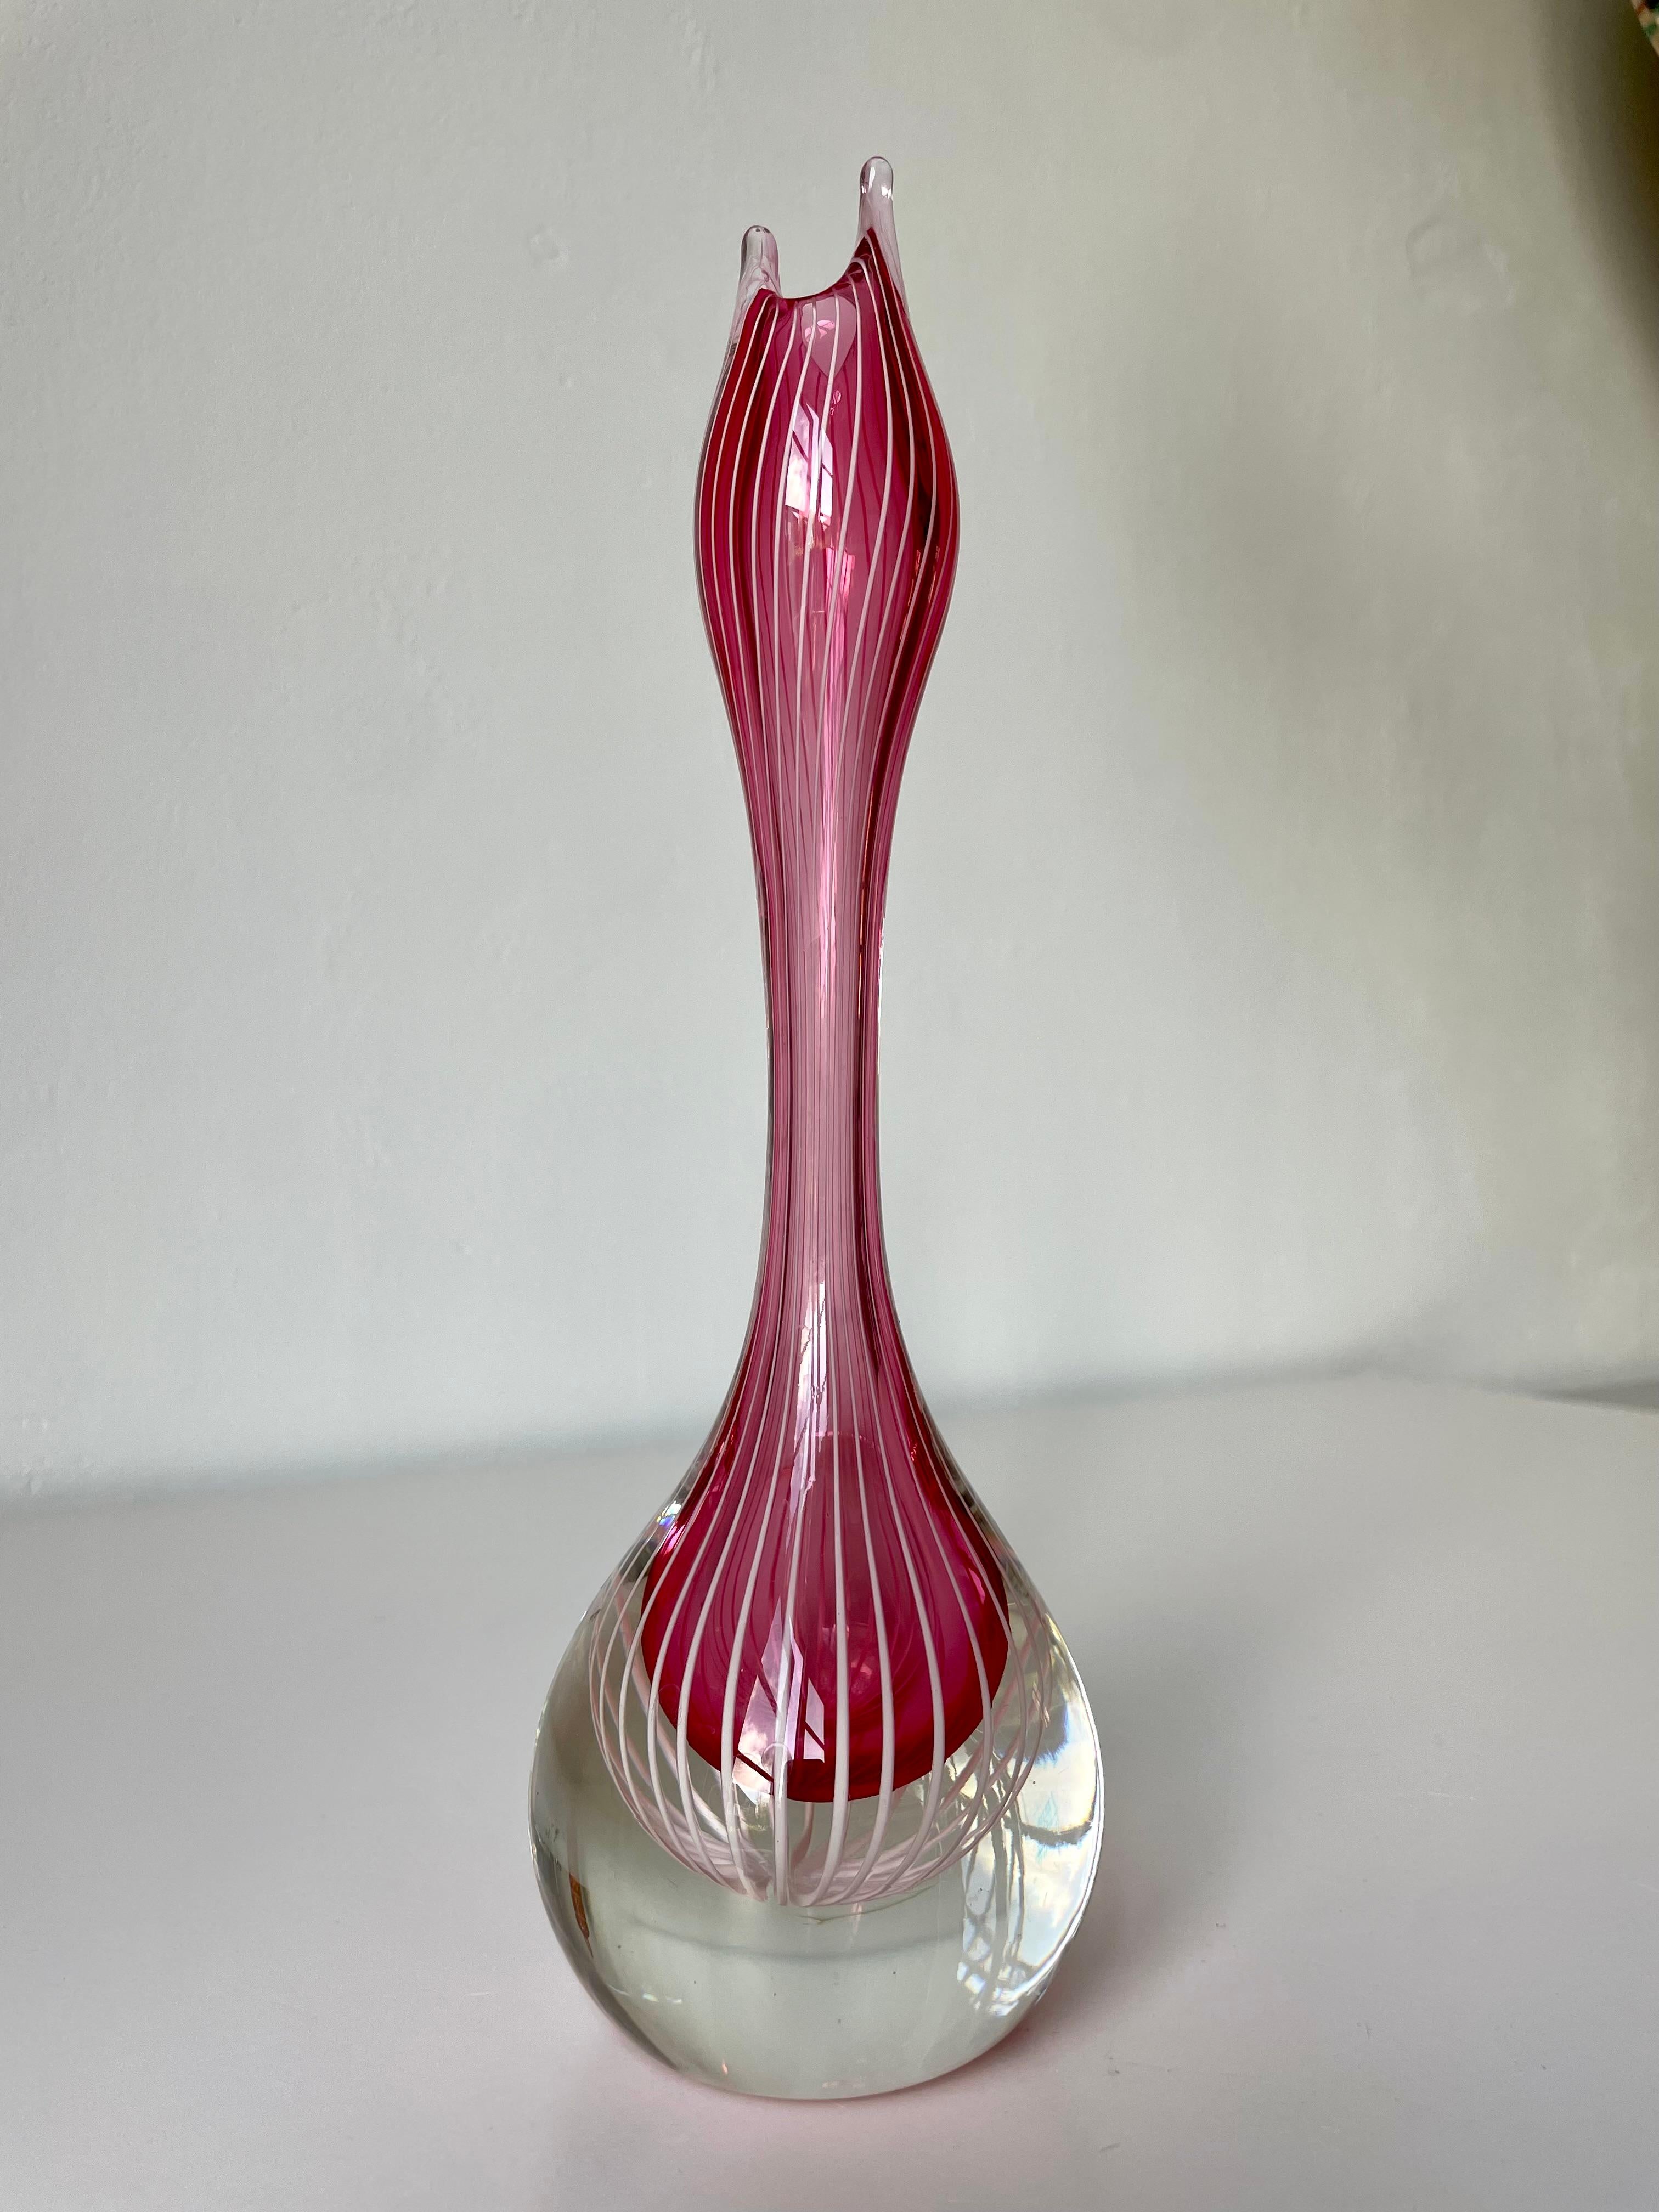 Hand-Crafted Vicke Lindstrand for Kosta Boda Pink White Striped Art Glass Vase, 1950s